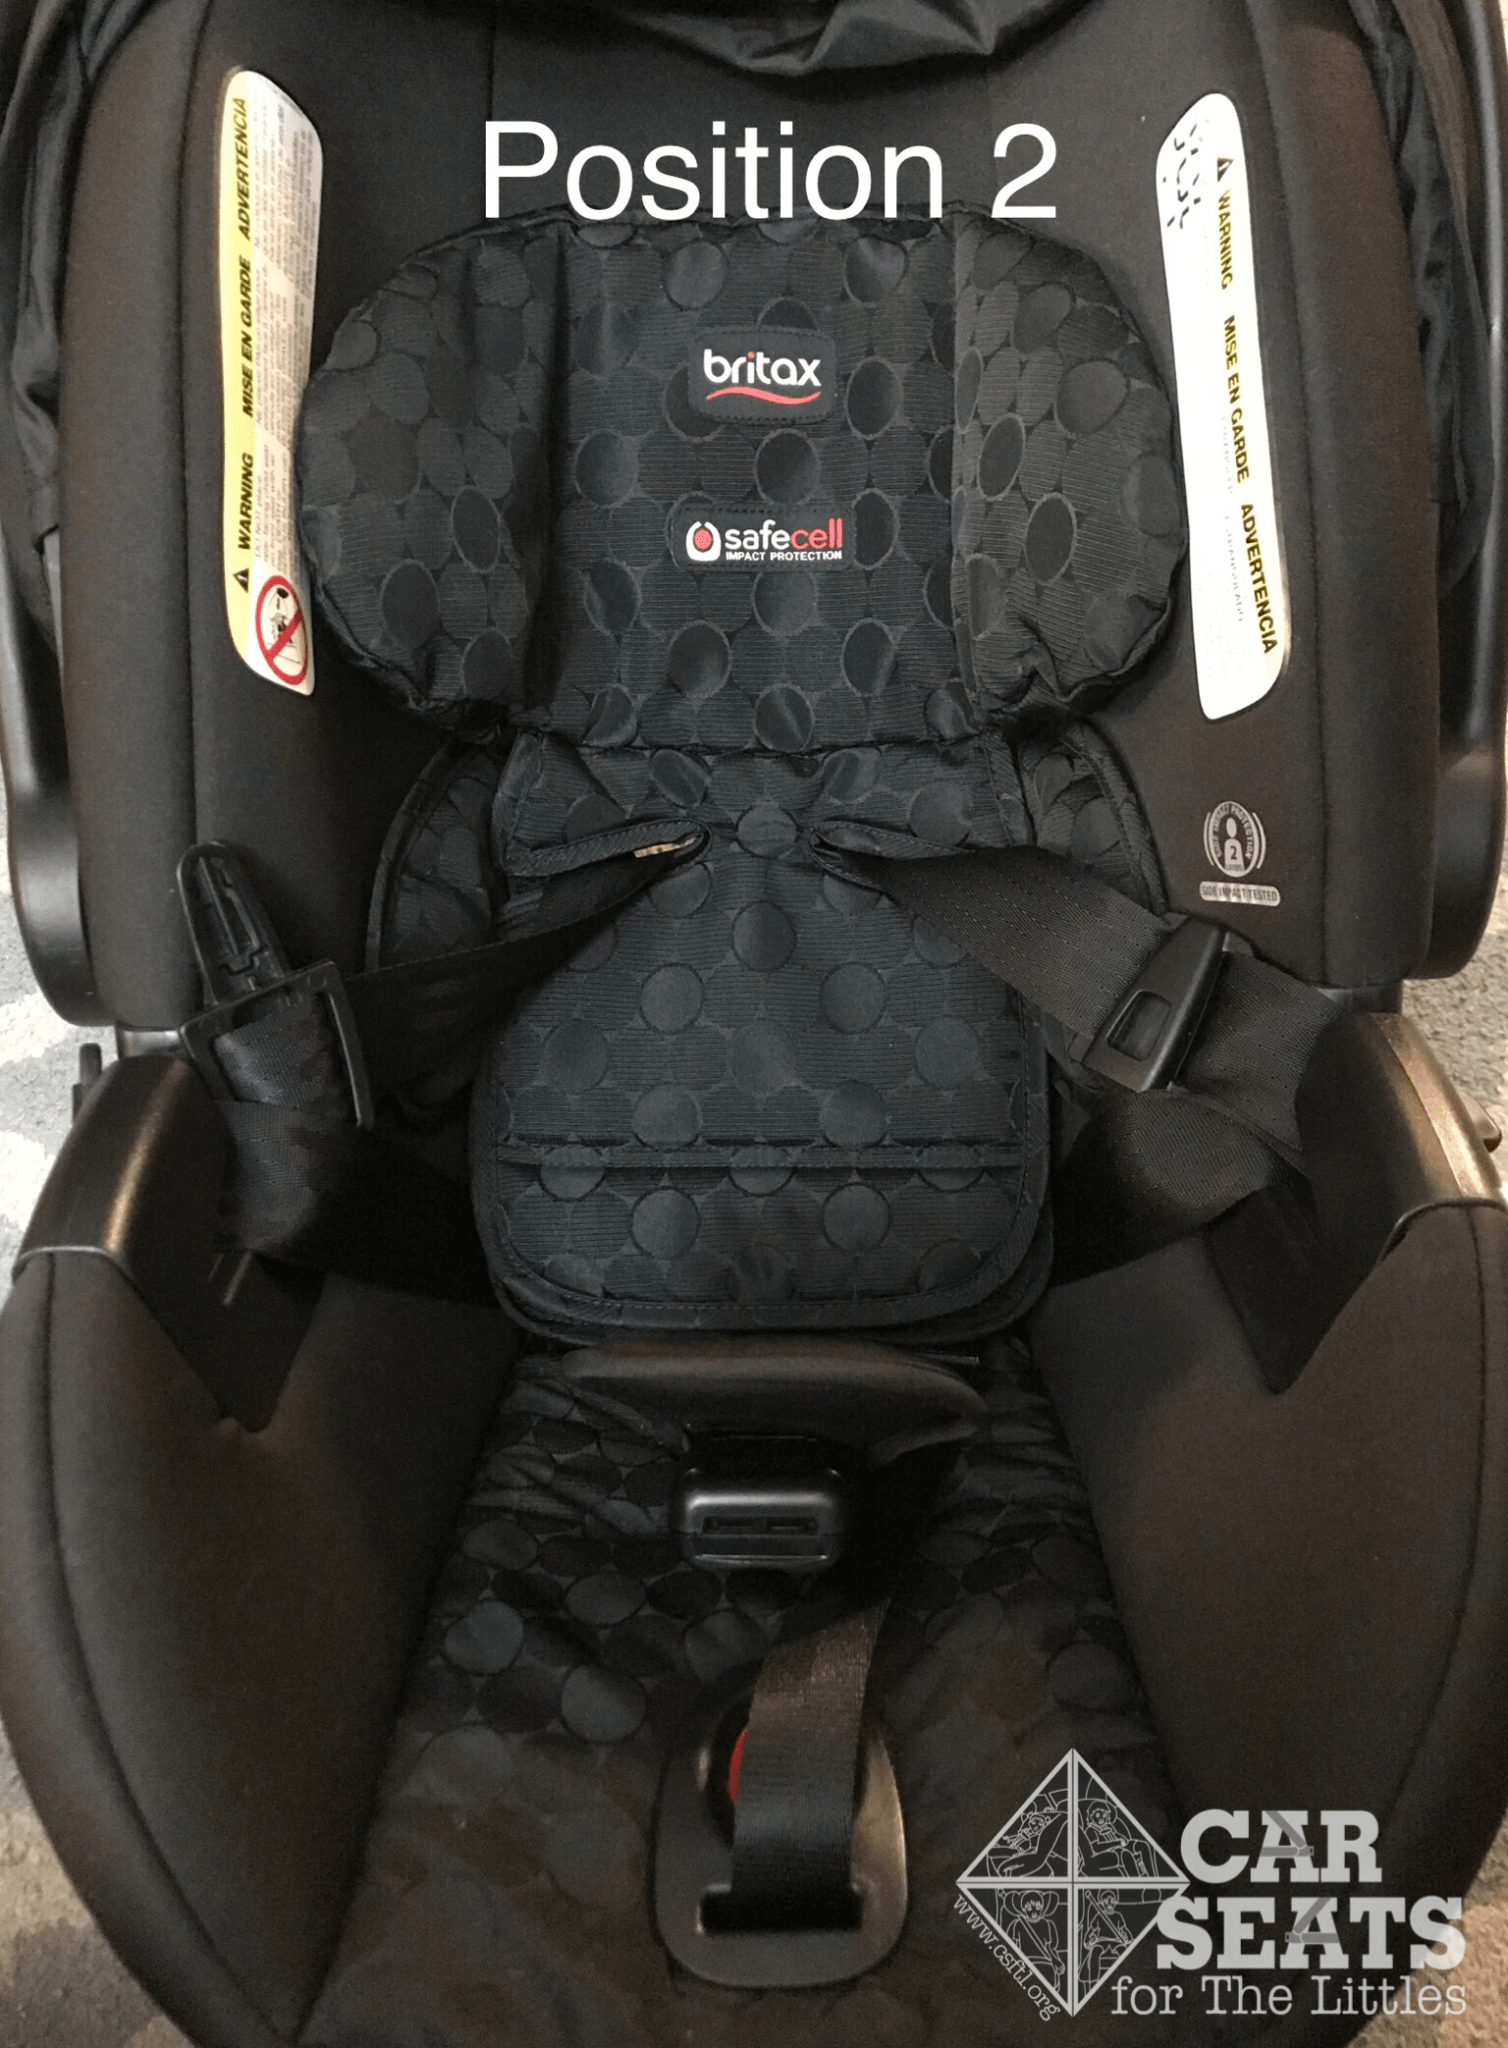 Britax Endeavours Review Car Seats, Britax Car Seat Infant Insert Weight